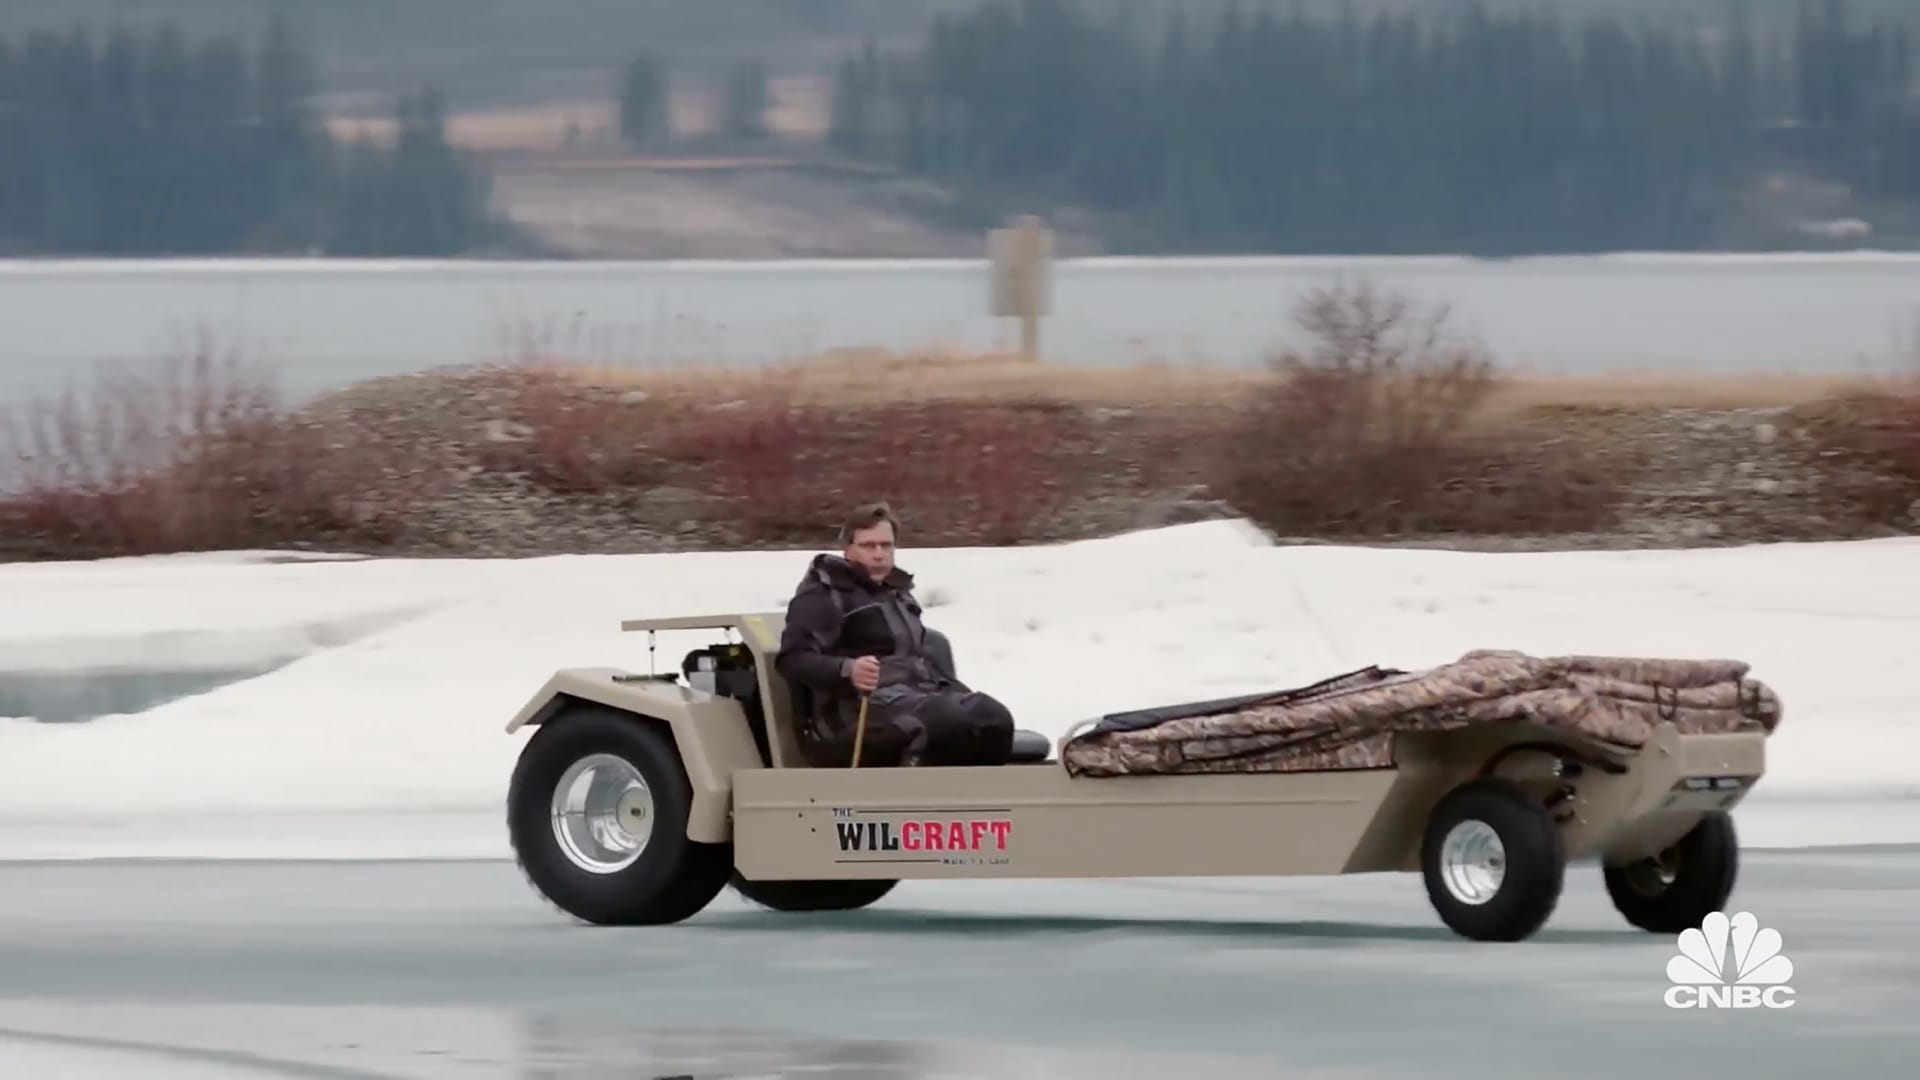 CNBC Prime Adventure Capitalists This ice-fishing vehicle is